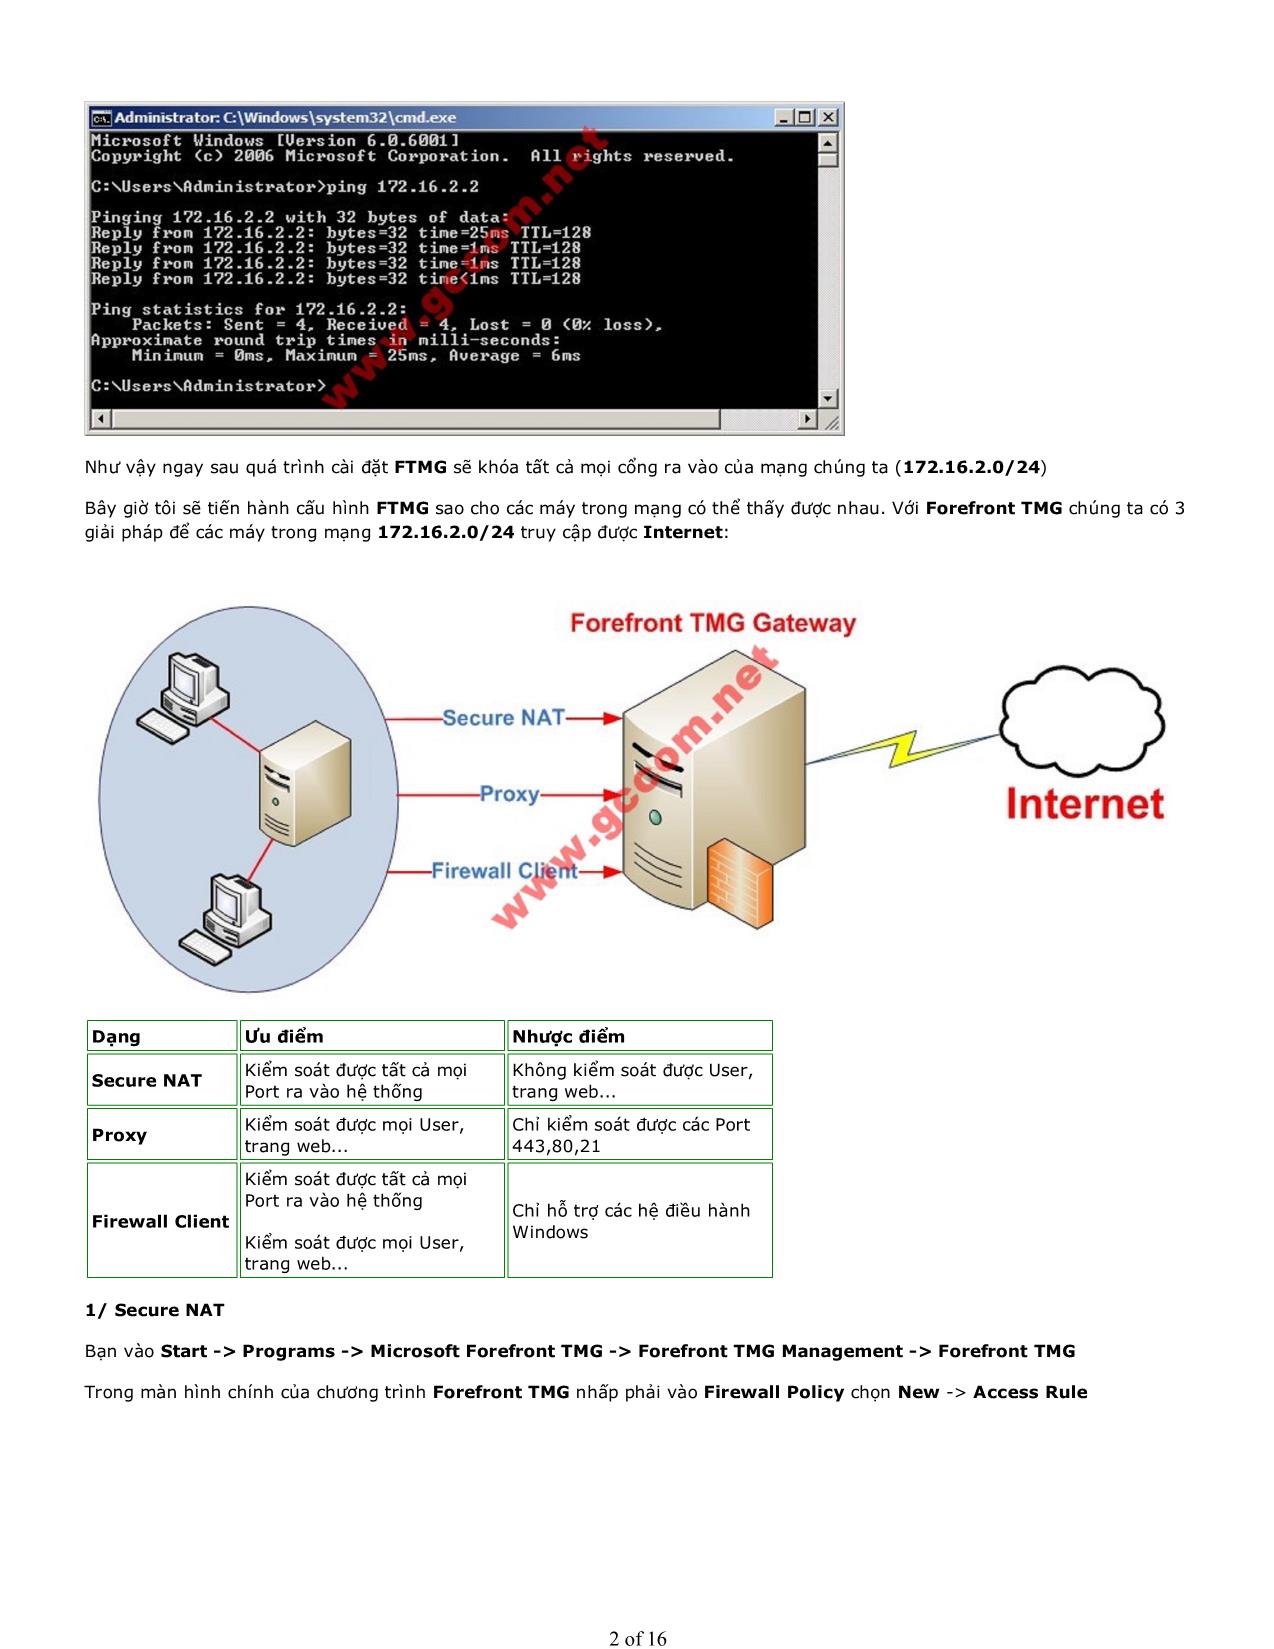 Microsoft Forefront TMG - Part 2: Secure NAT - Proxy - Firewall Client trang 2